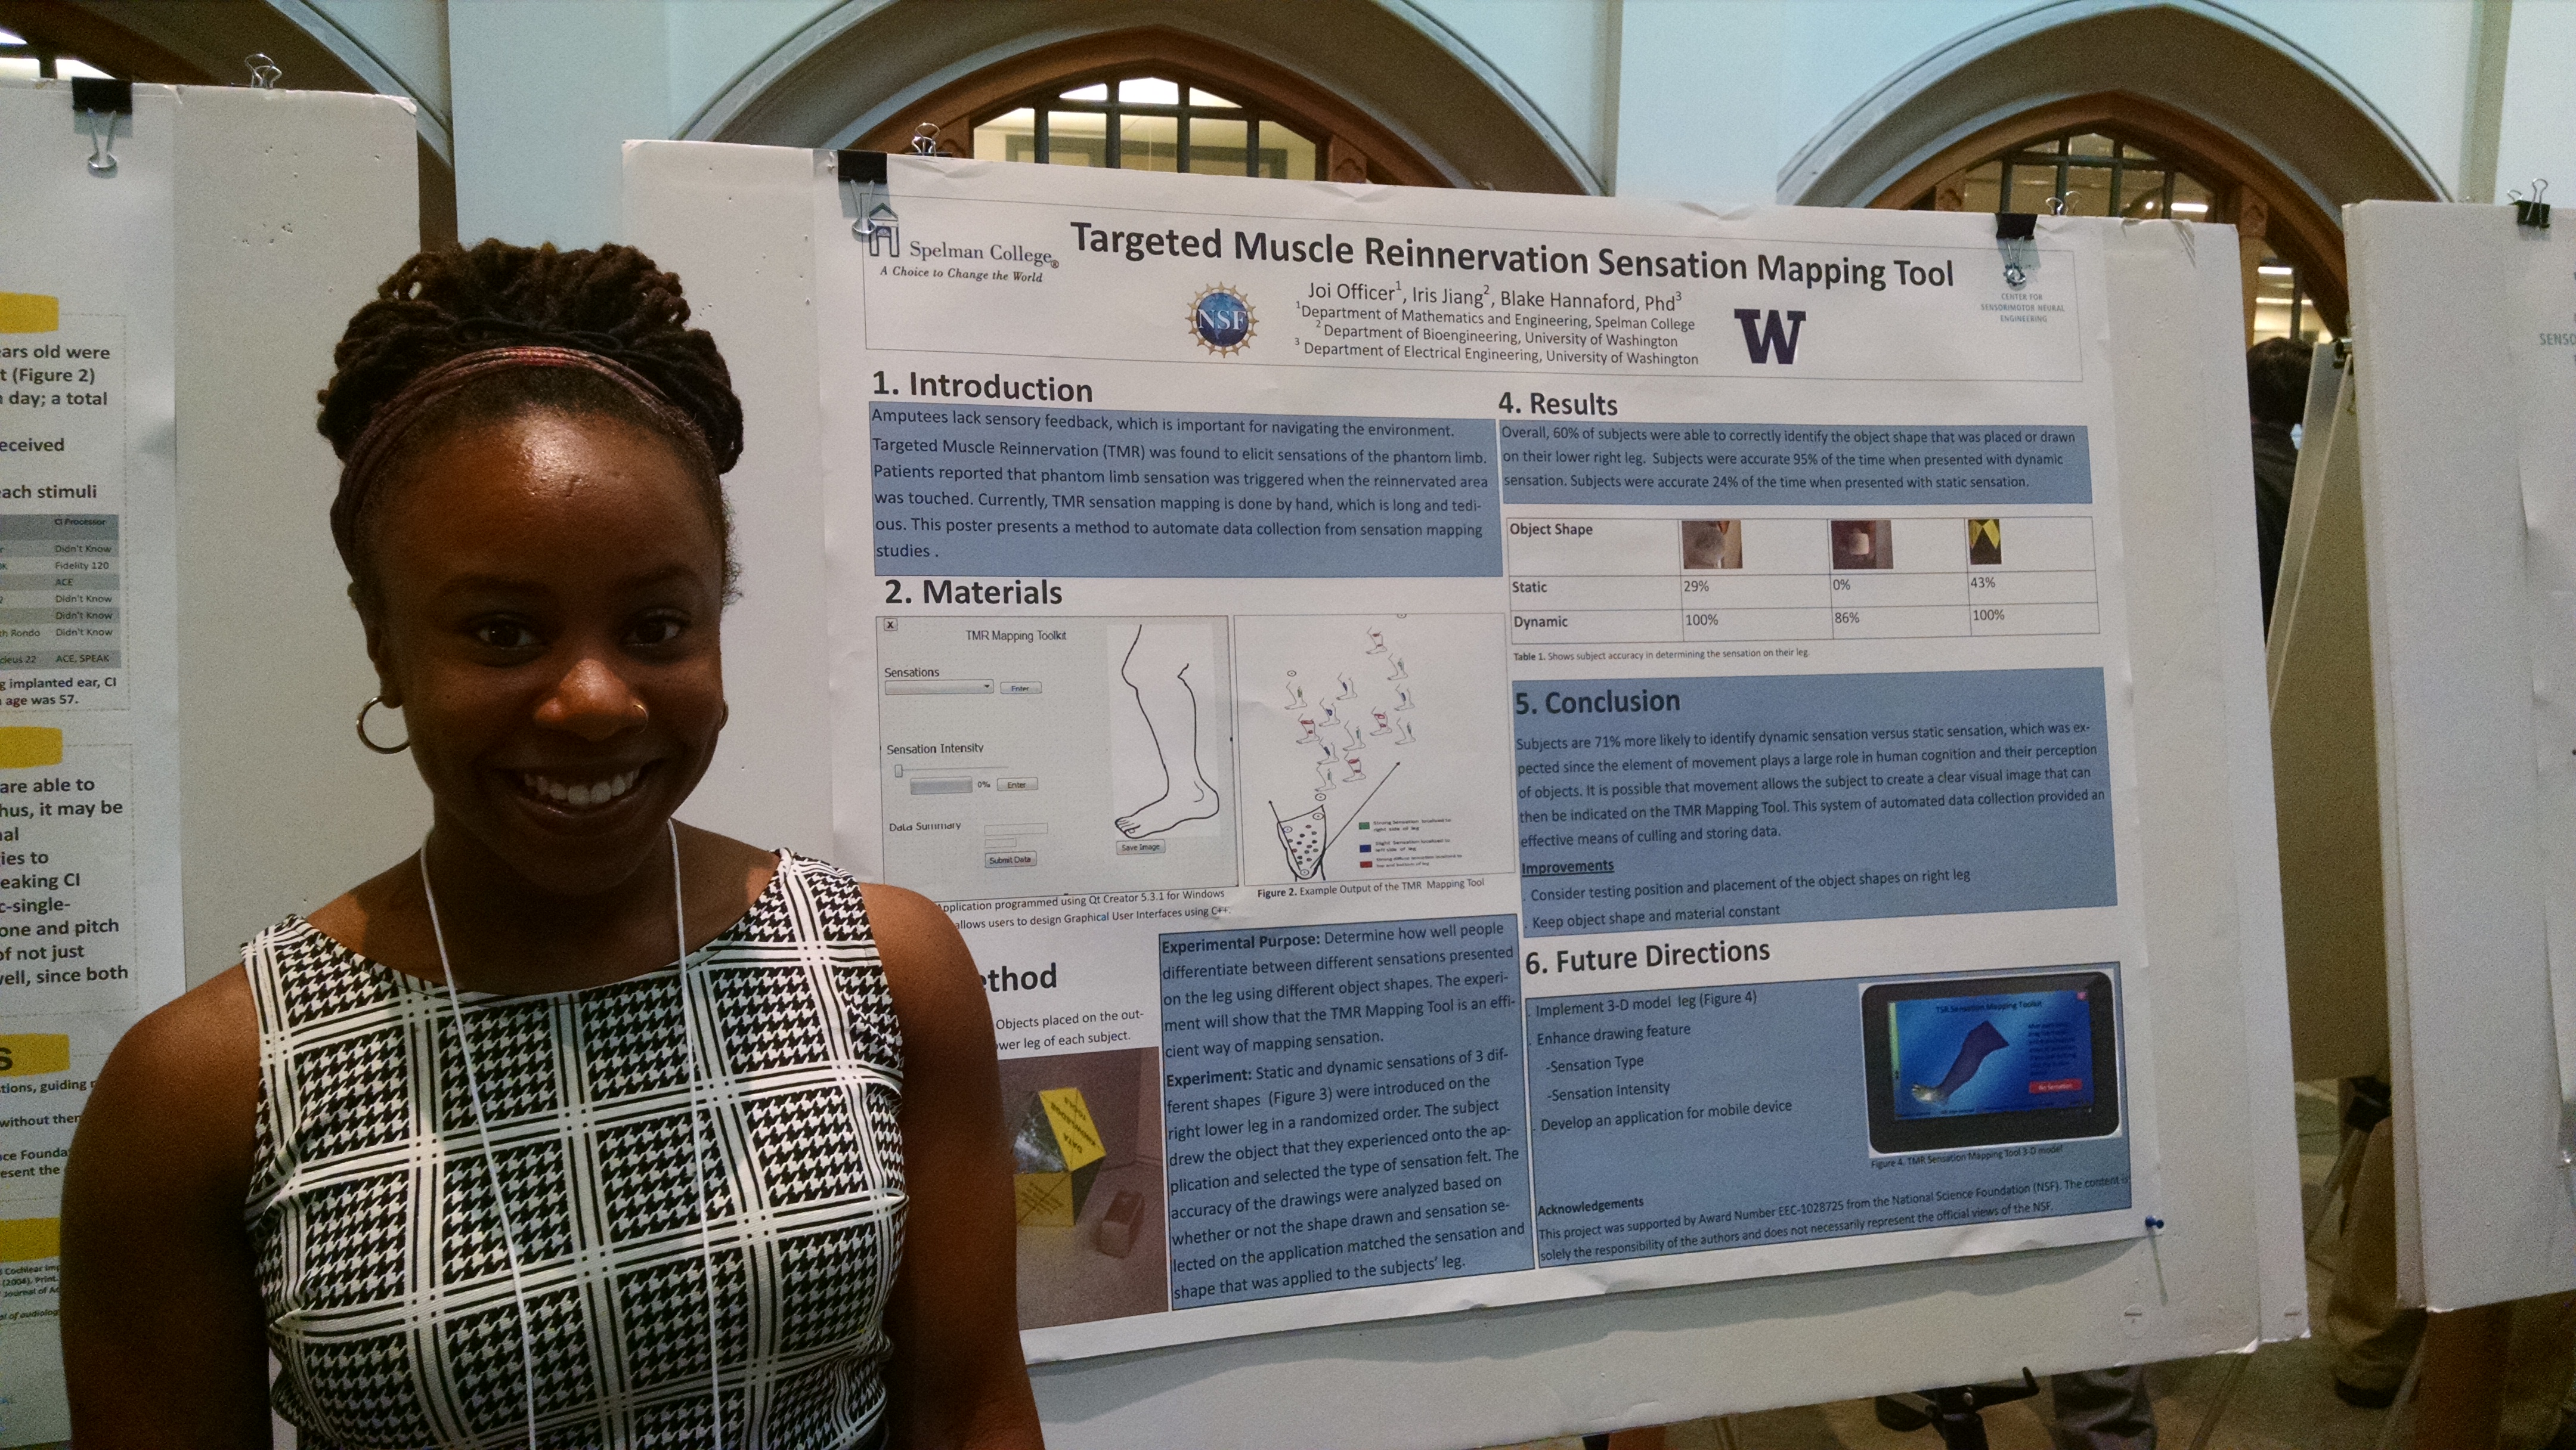 Joi Officer is a mathematics and engineering undergraduate from Spelman College. She spent the summer working on a tool to help automate TMR sensory mapping procedures.